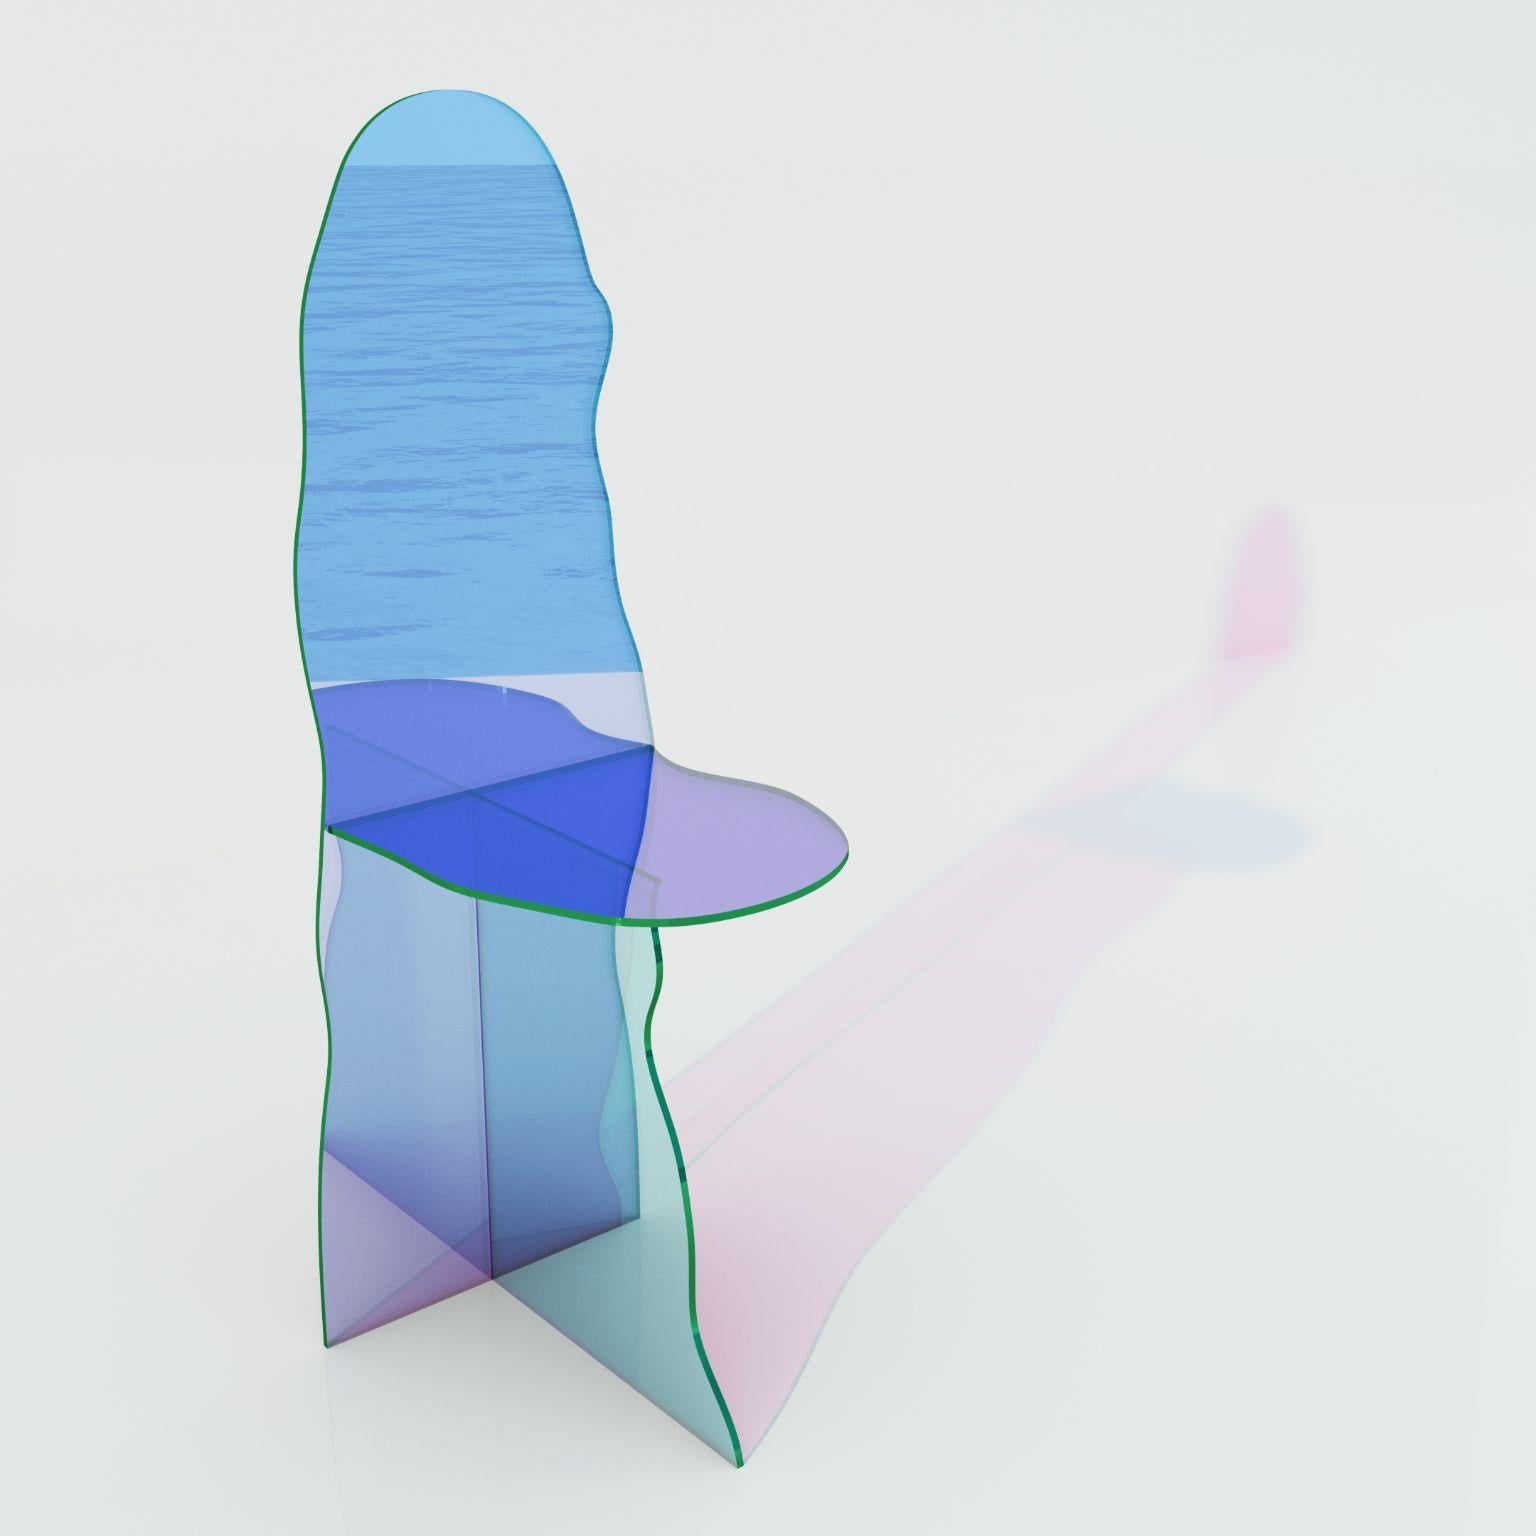 Isola chair by Brajak Vitberg
Dimensions: 43 x 55 x 120 cm
Materials: Dichroic glass

Can be made in Satin glass finish. Please contact us.

Bijelic and Brajak are two architects from Ljubljana, Slovenia.
They are striving to design craft elements